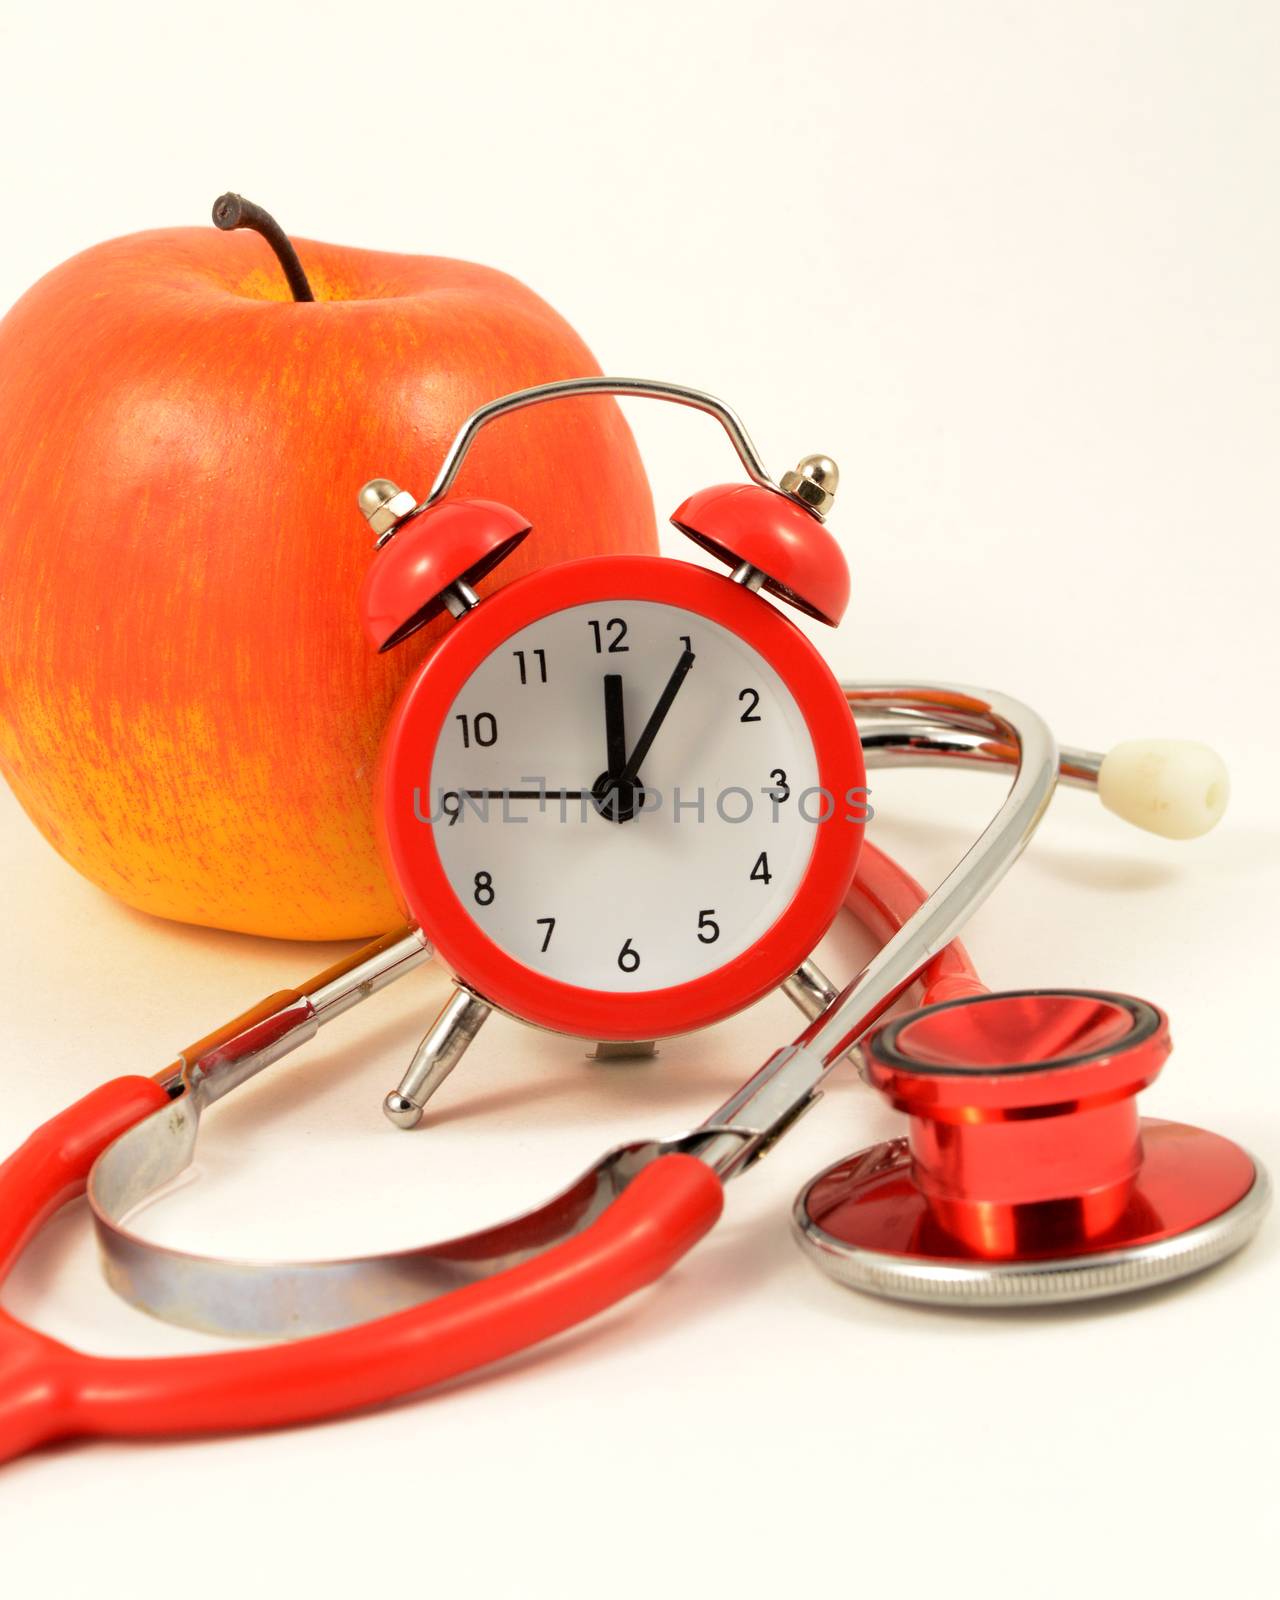 An apple and alarm clock and stethoscope come together for representing a clinical checkup time.